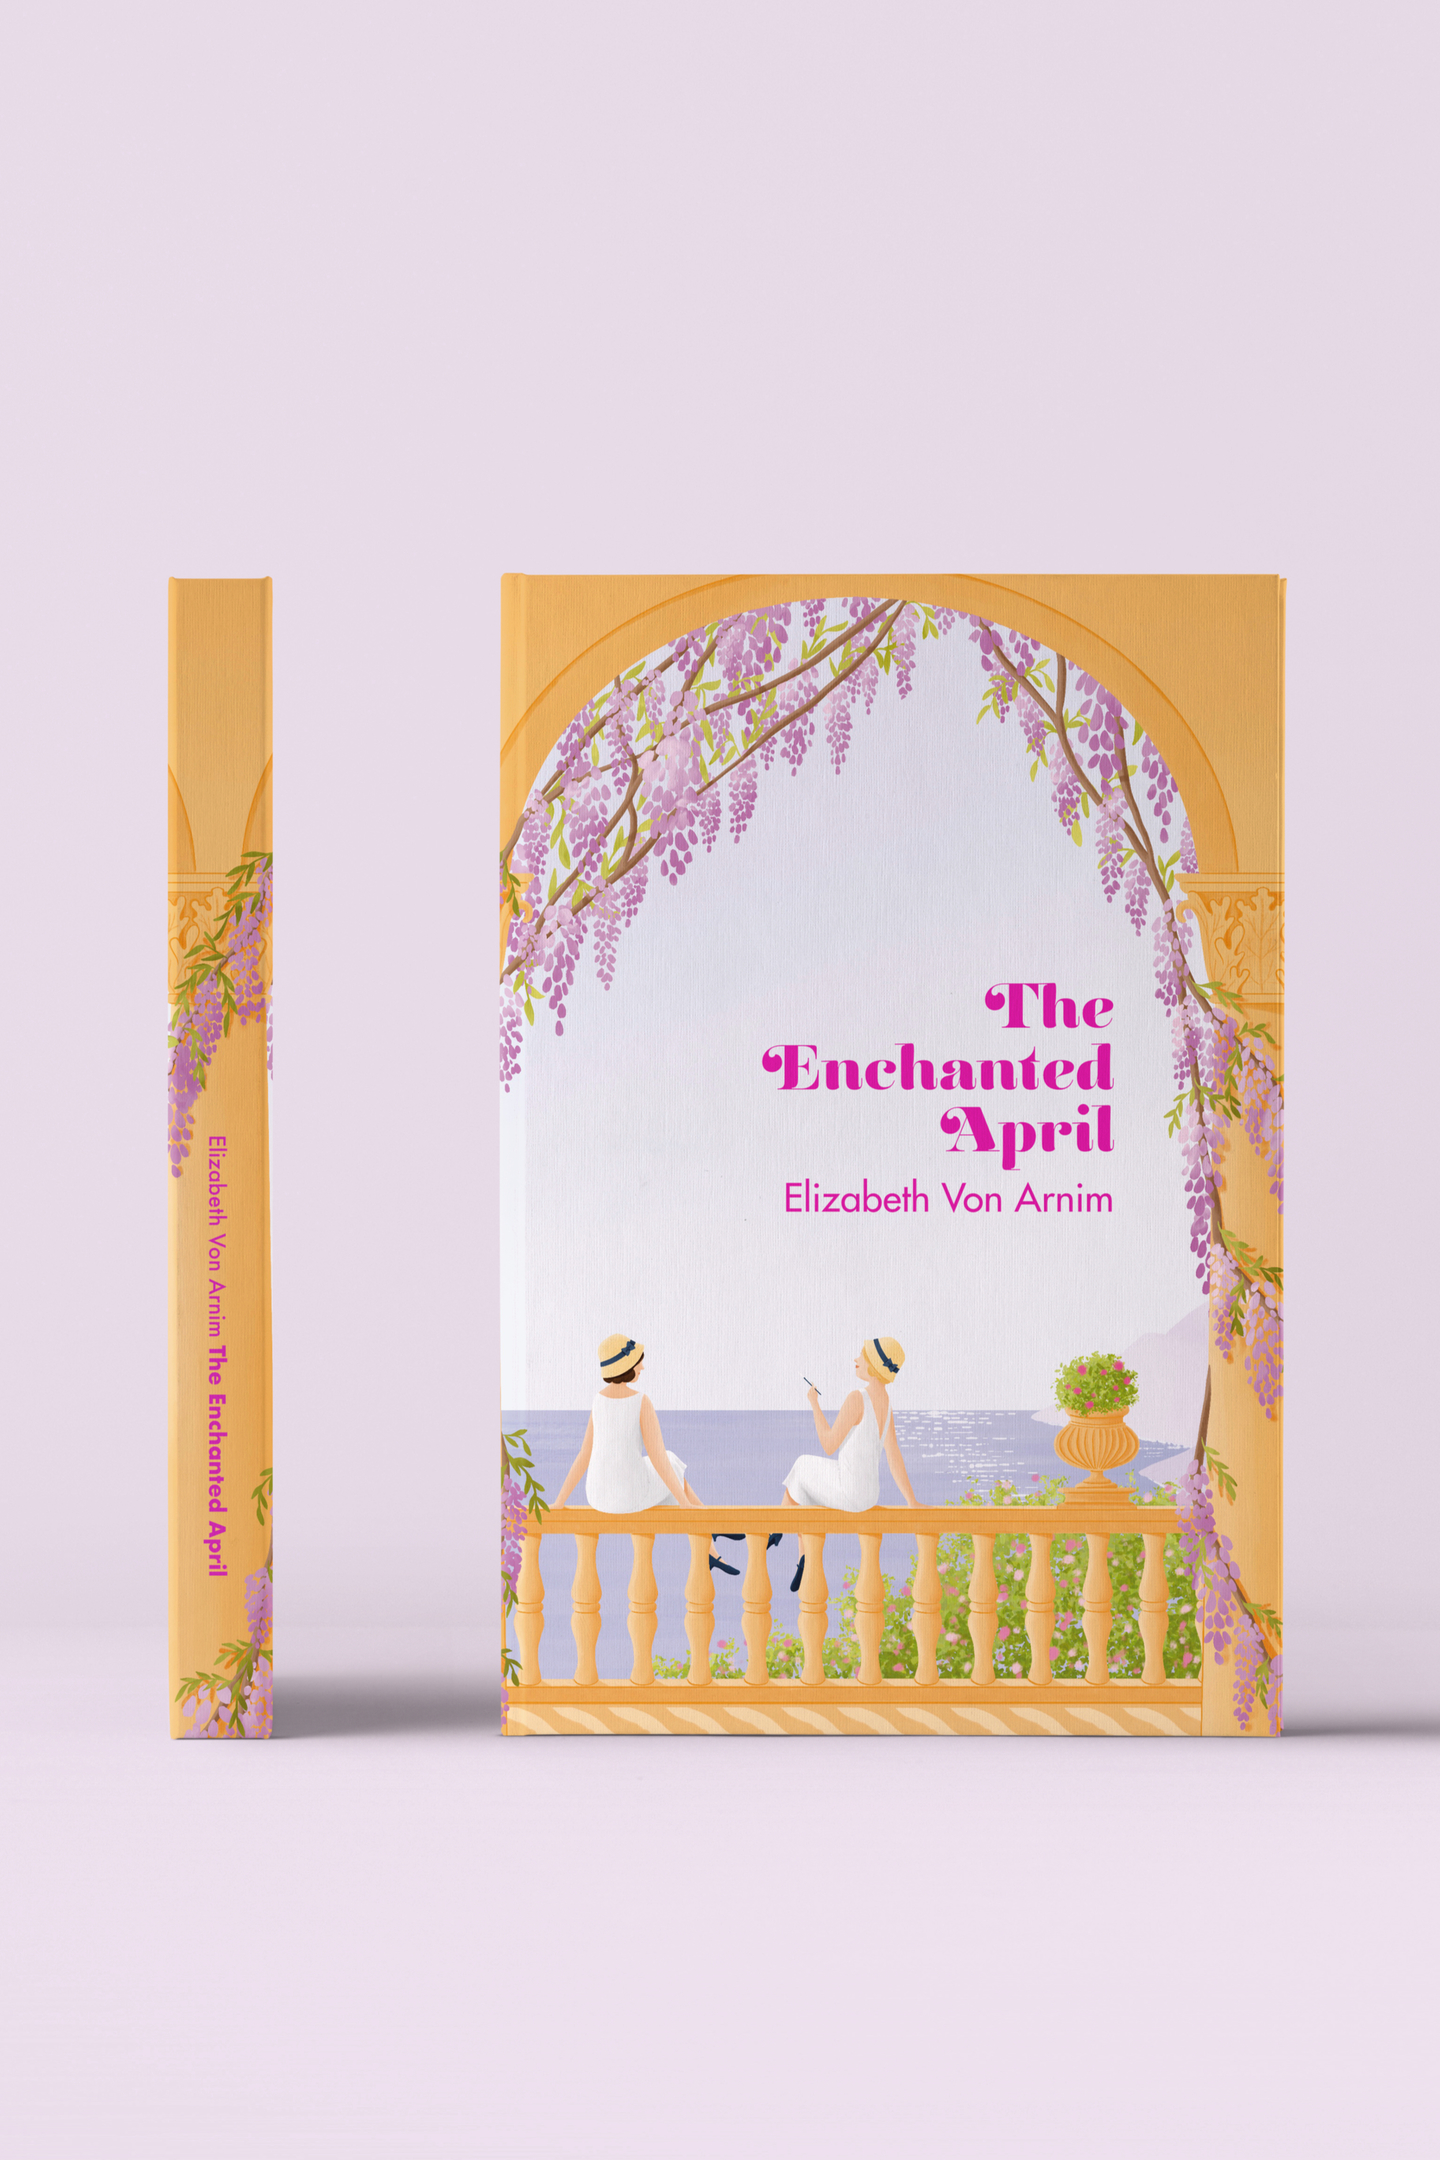 Dust Jacket The Enchanted April book cover illustration Pin